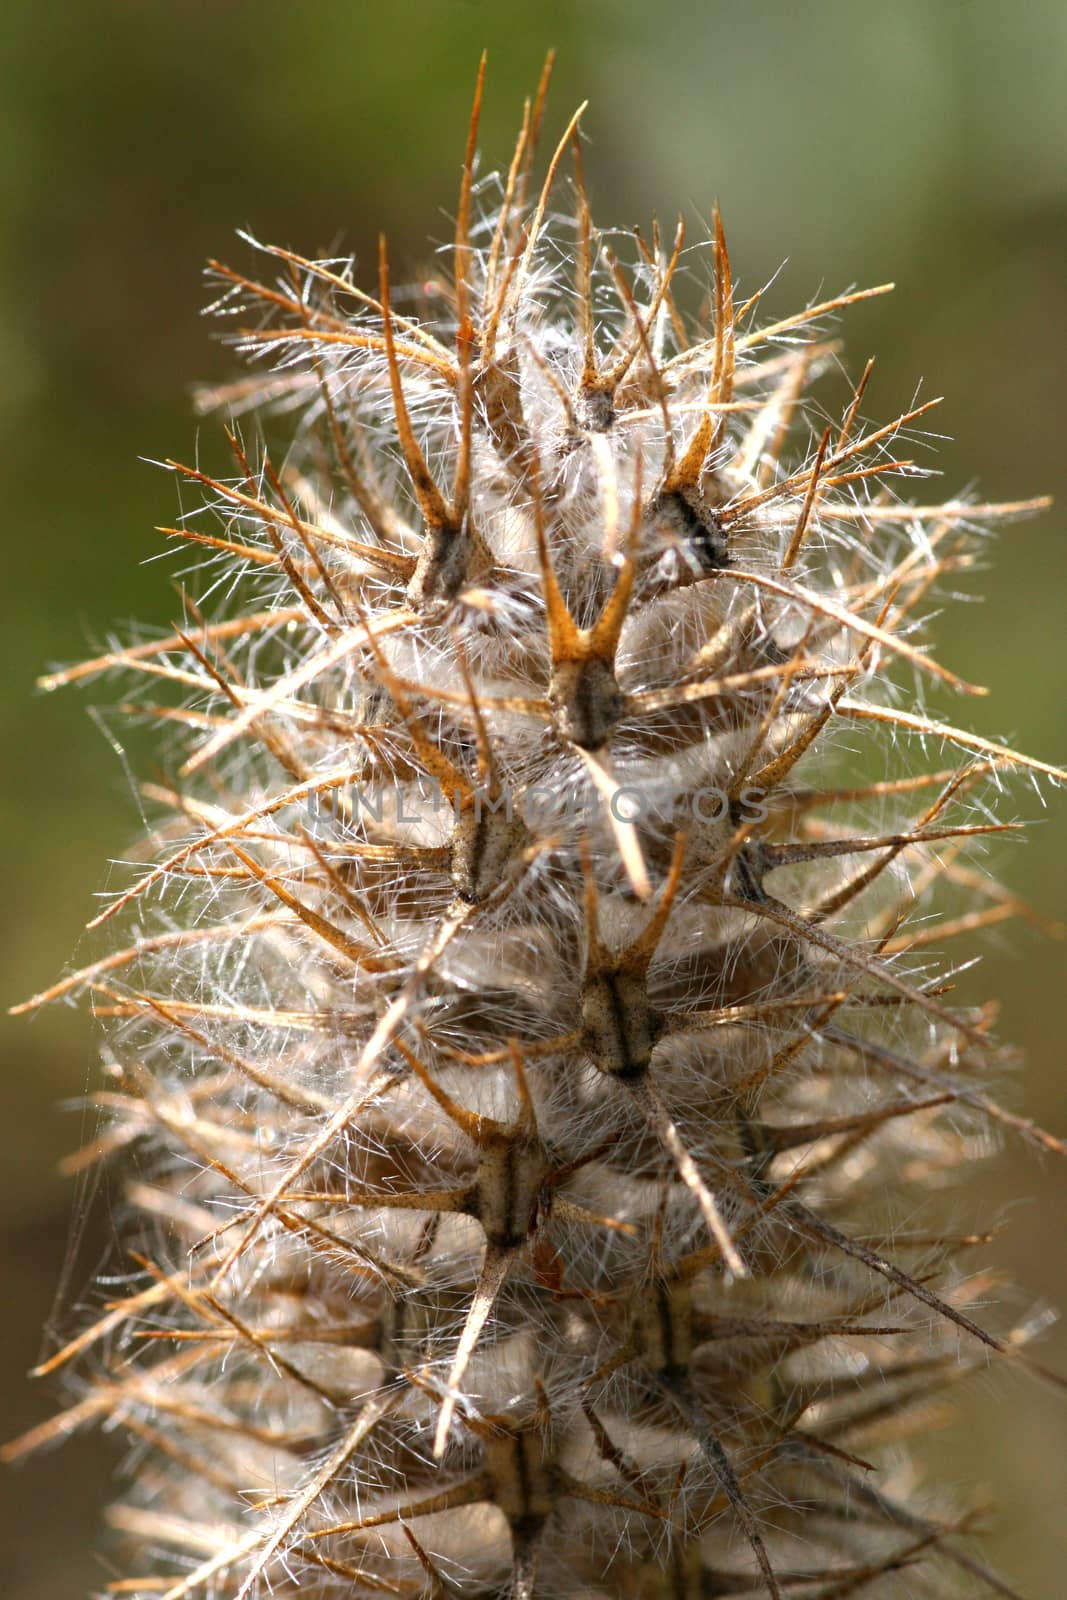 Prickly inflorescence by Carratera